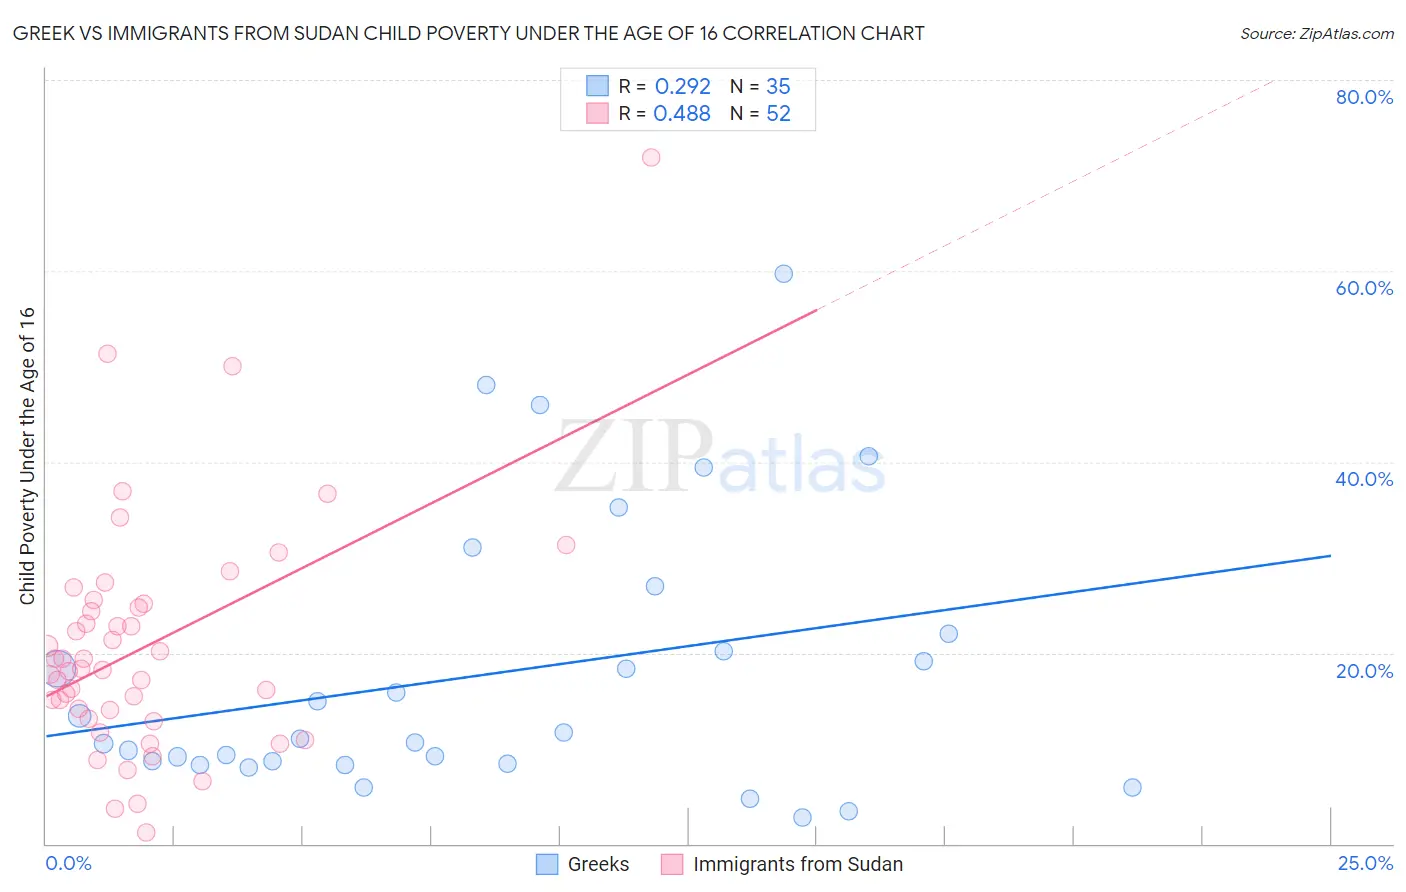 Greek vs Immigrants from Sudan Child Poverty Under the Age of 16